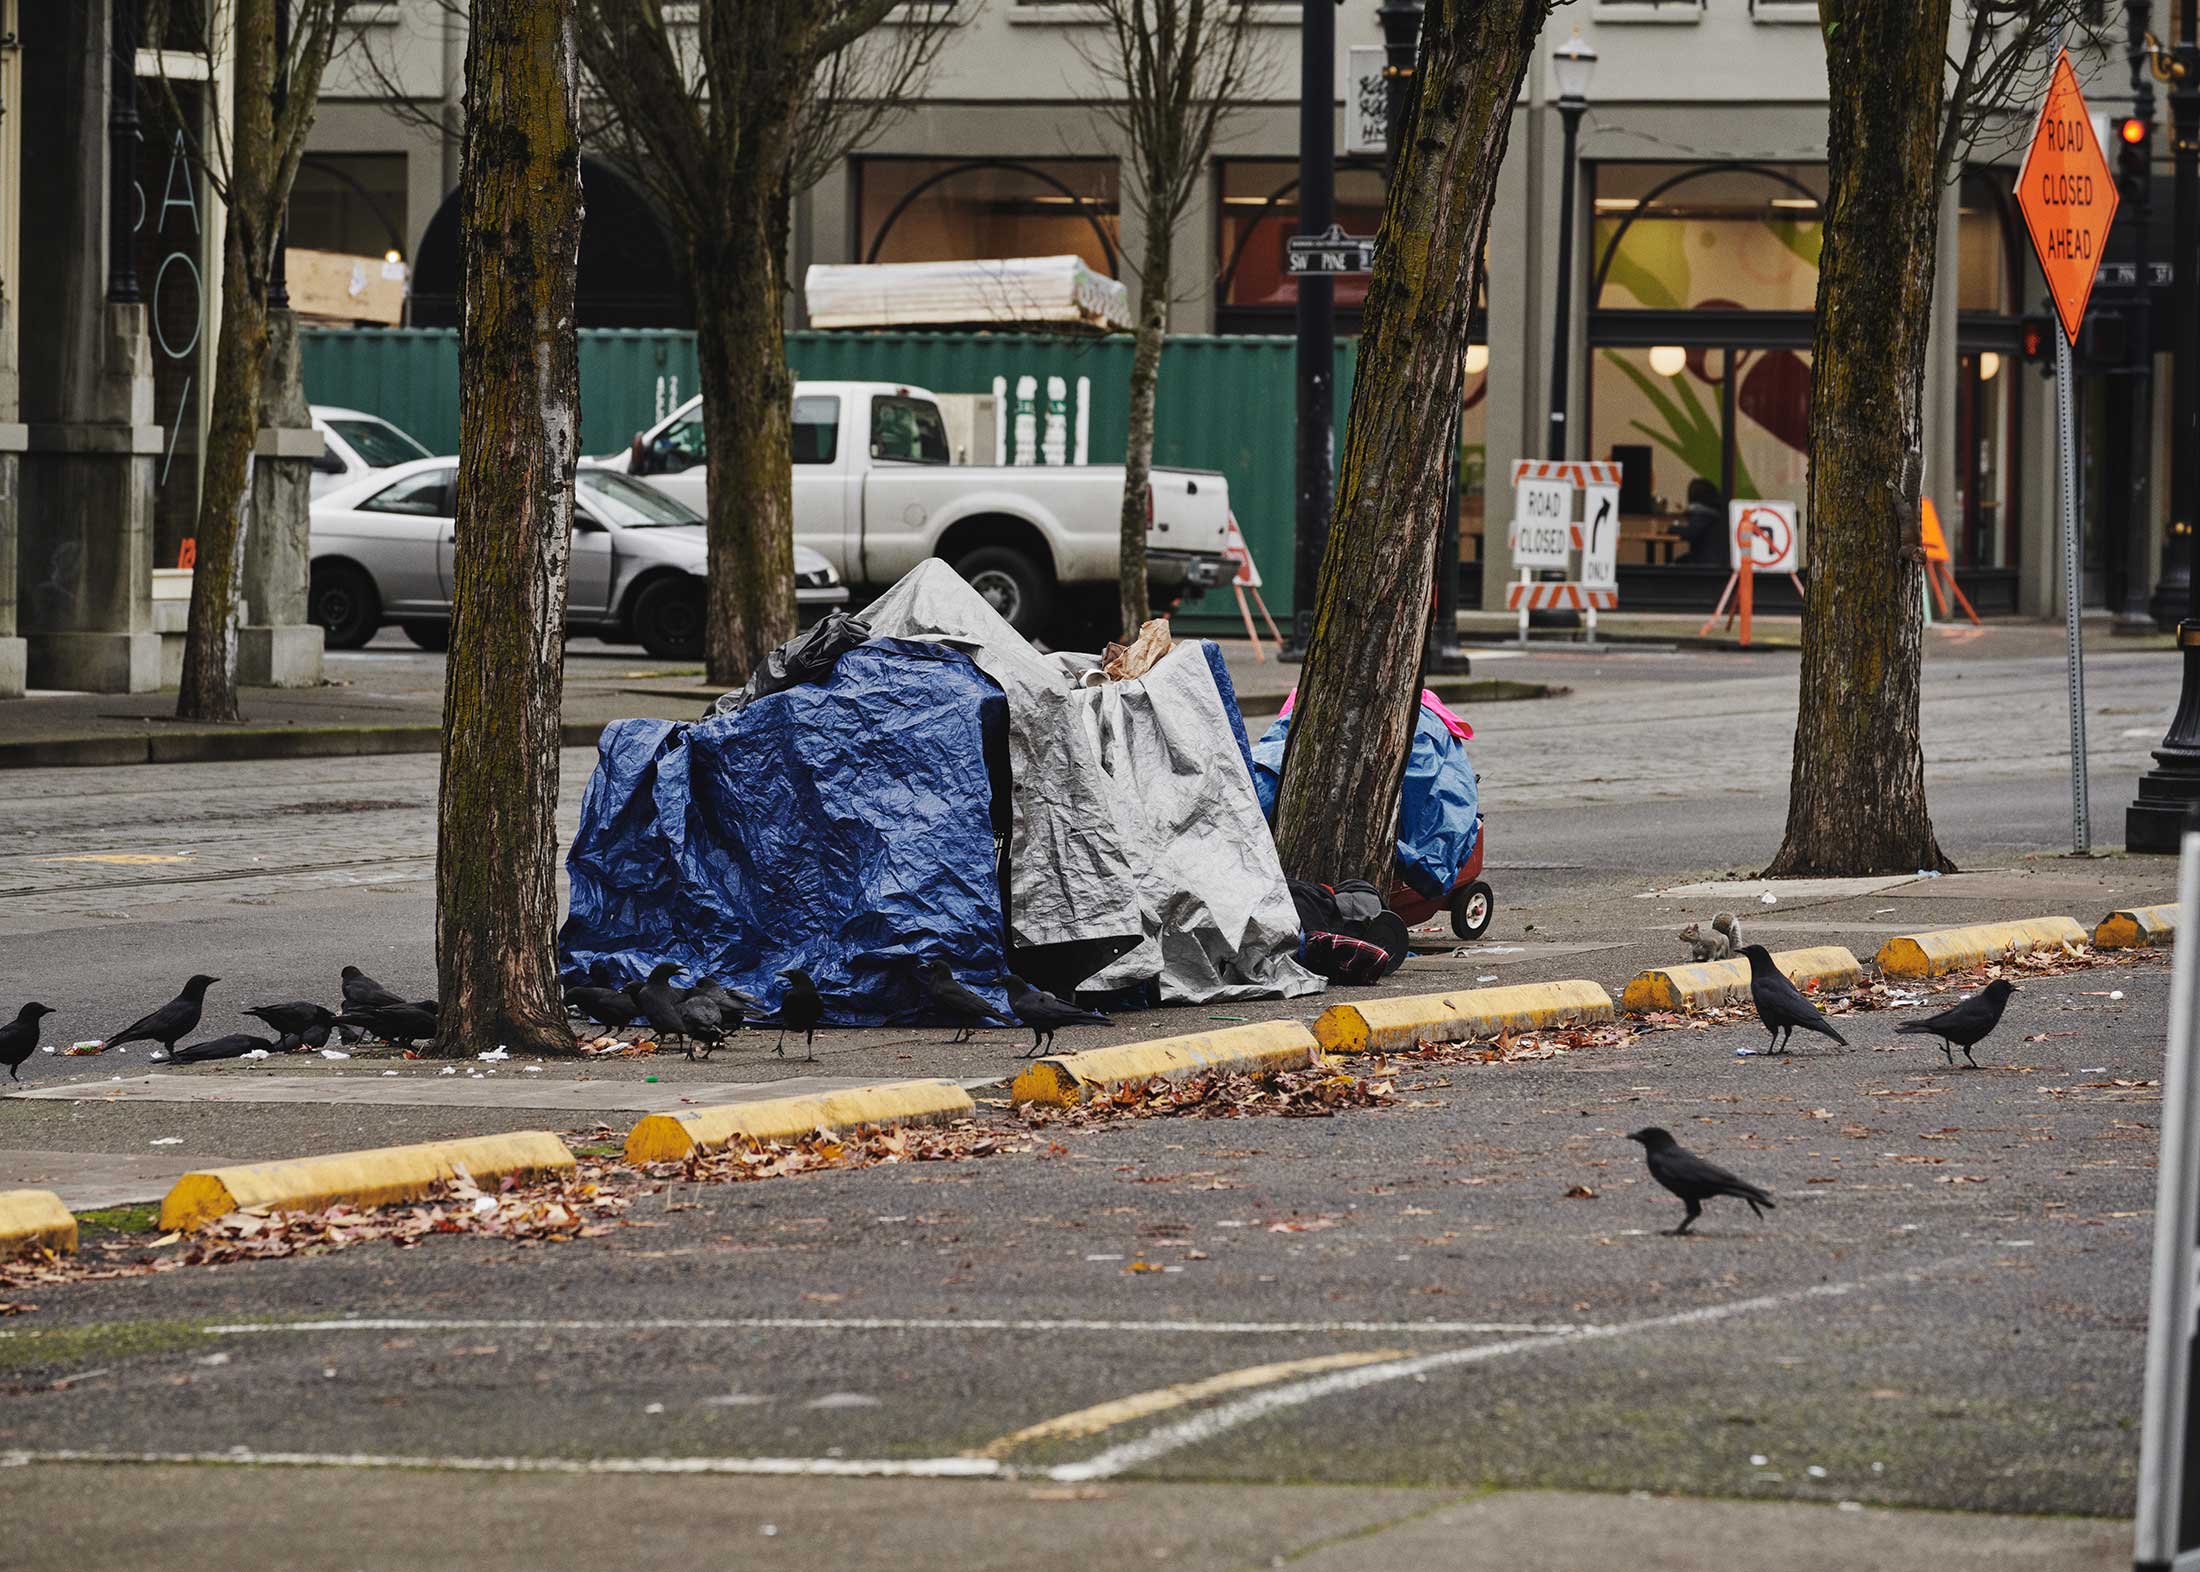 Man with belongings on SW 12th Ave. and SW Washington St., Portland, Ore.